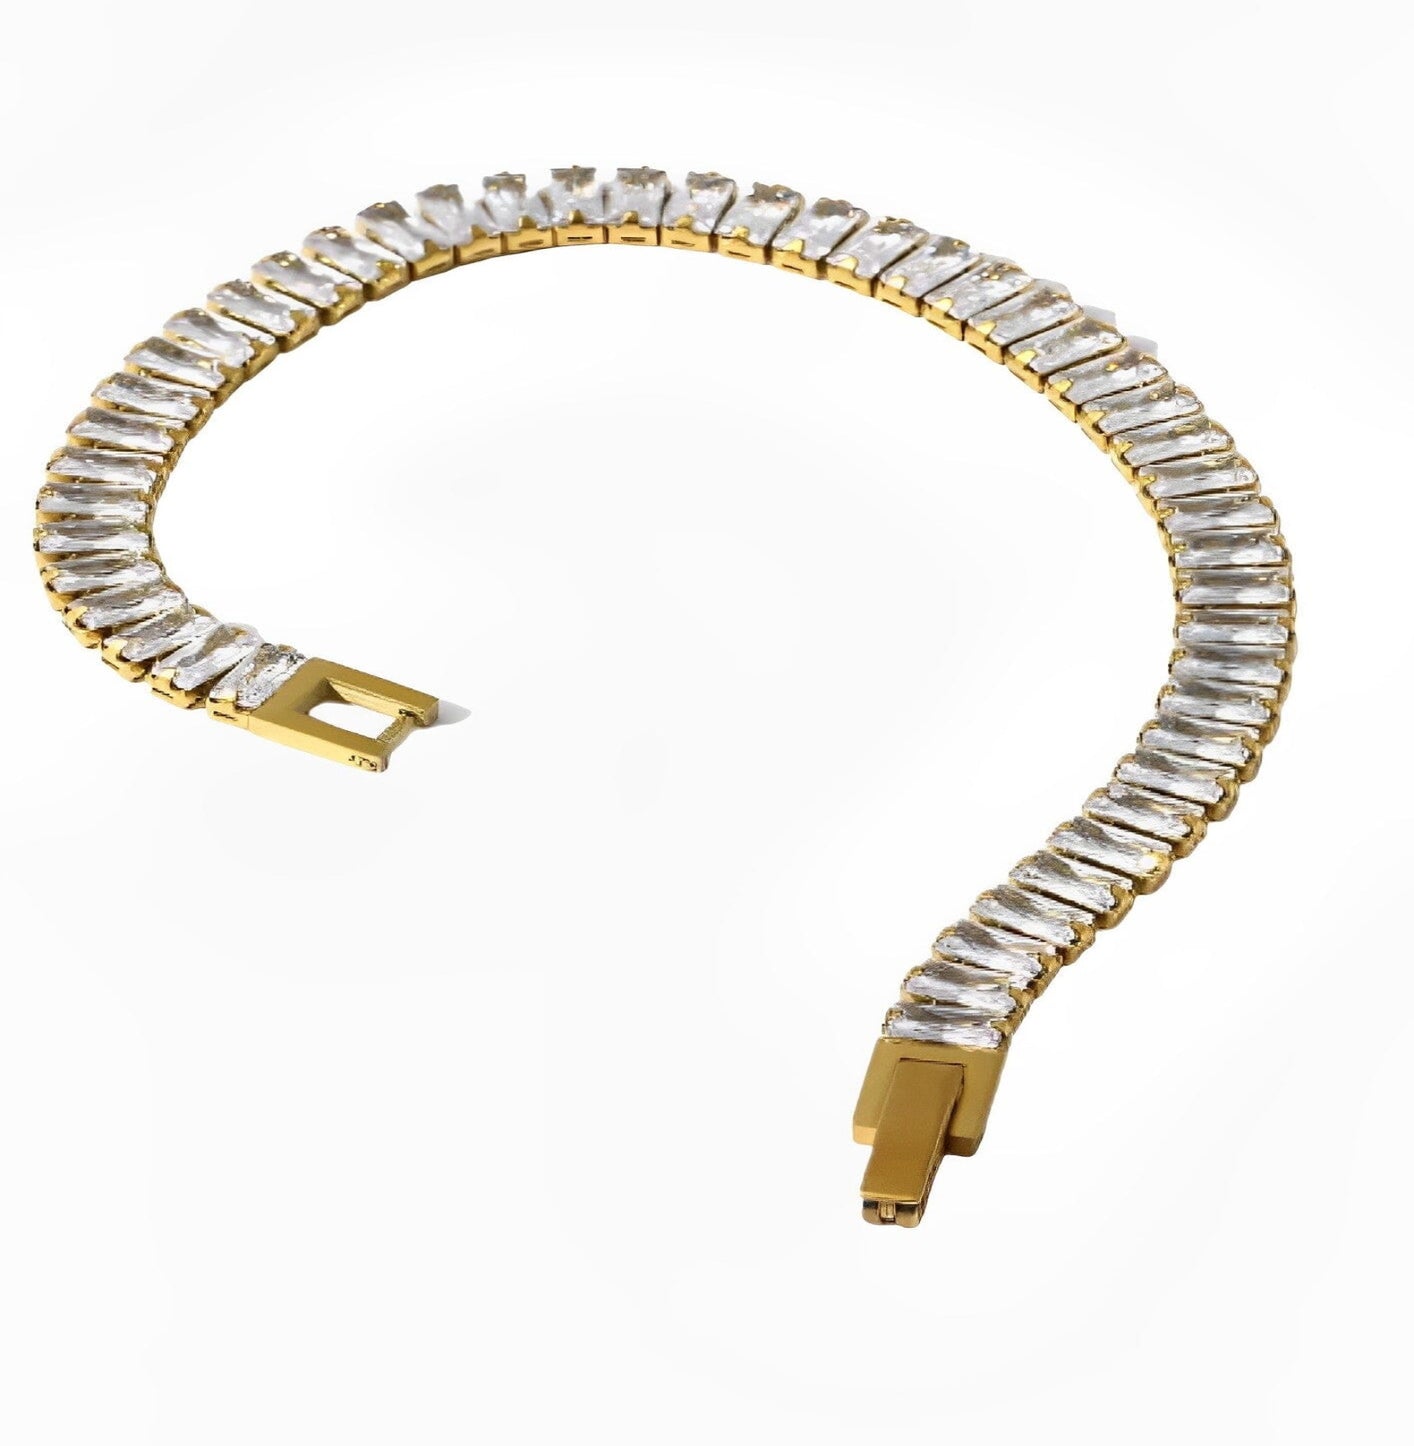 DIAMOND BRACELET neck Yubama Jewelry Online Store - The Elegant Designs of Gold and Silver ! 